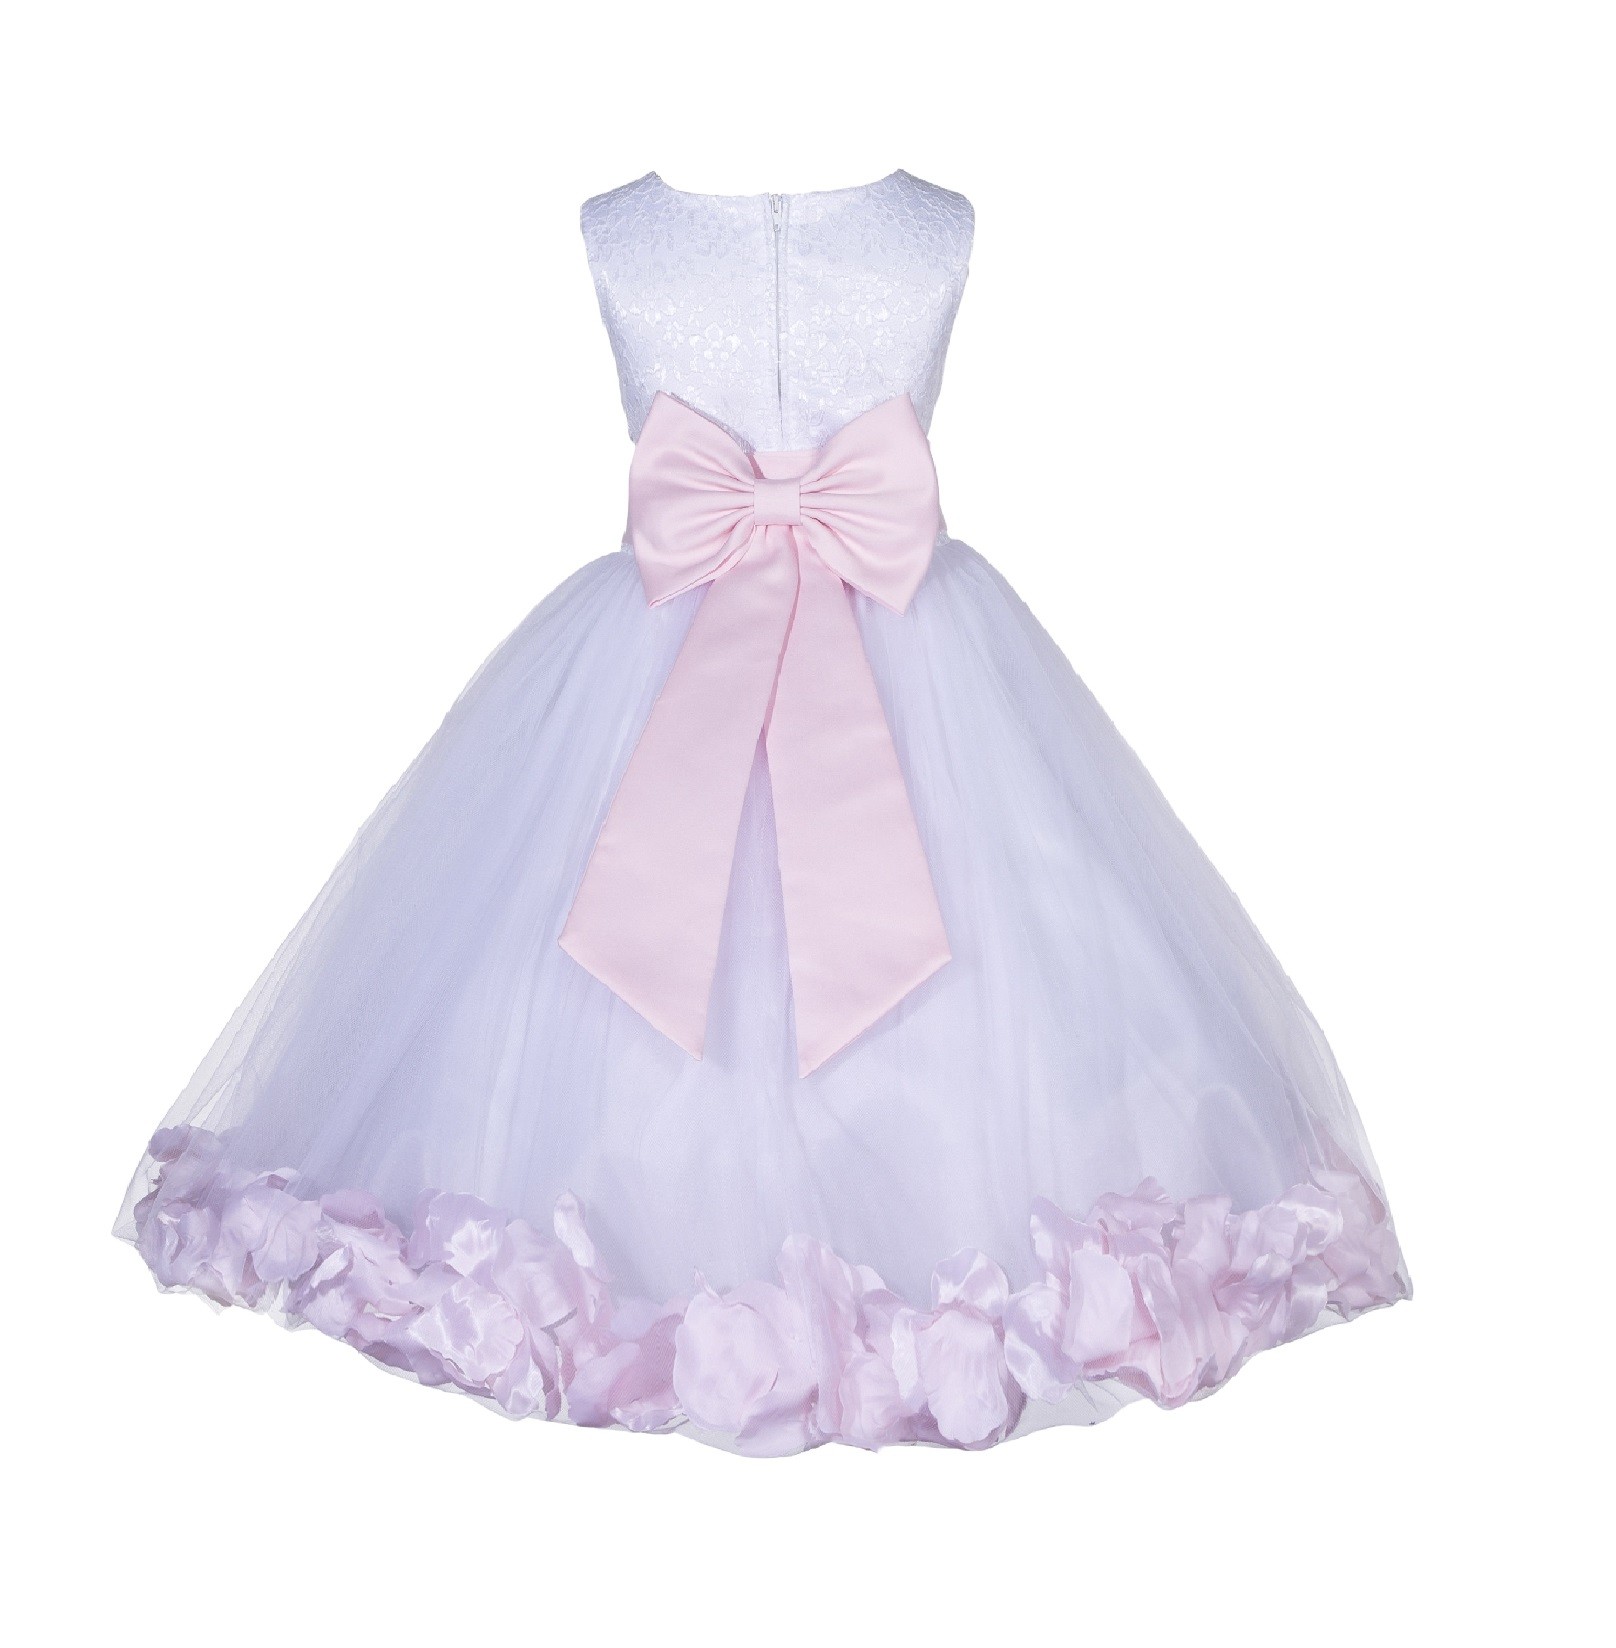 White/Pink Lace Top Tulle Floral Petals Flower Girl Dress 165T